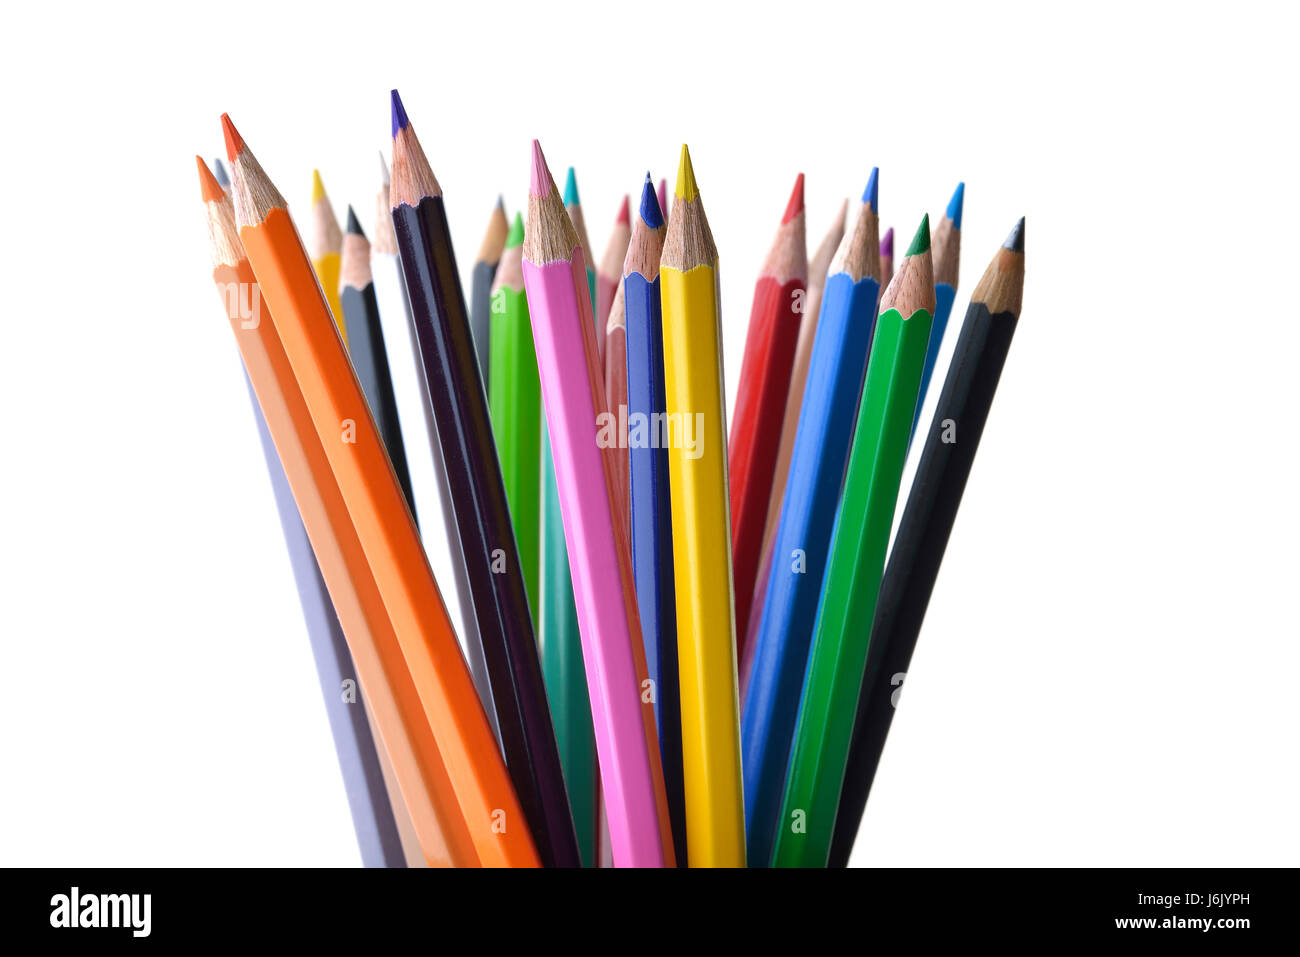 Front View of Assorted Colored Pencils on White Background Stock Photo